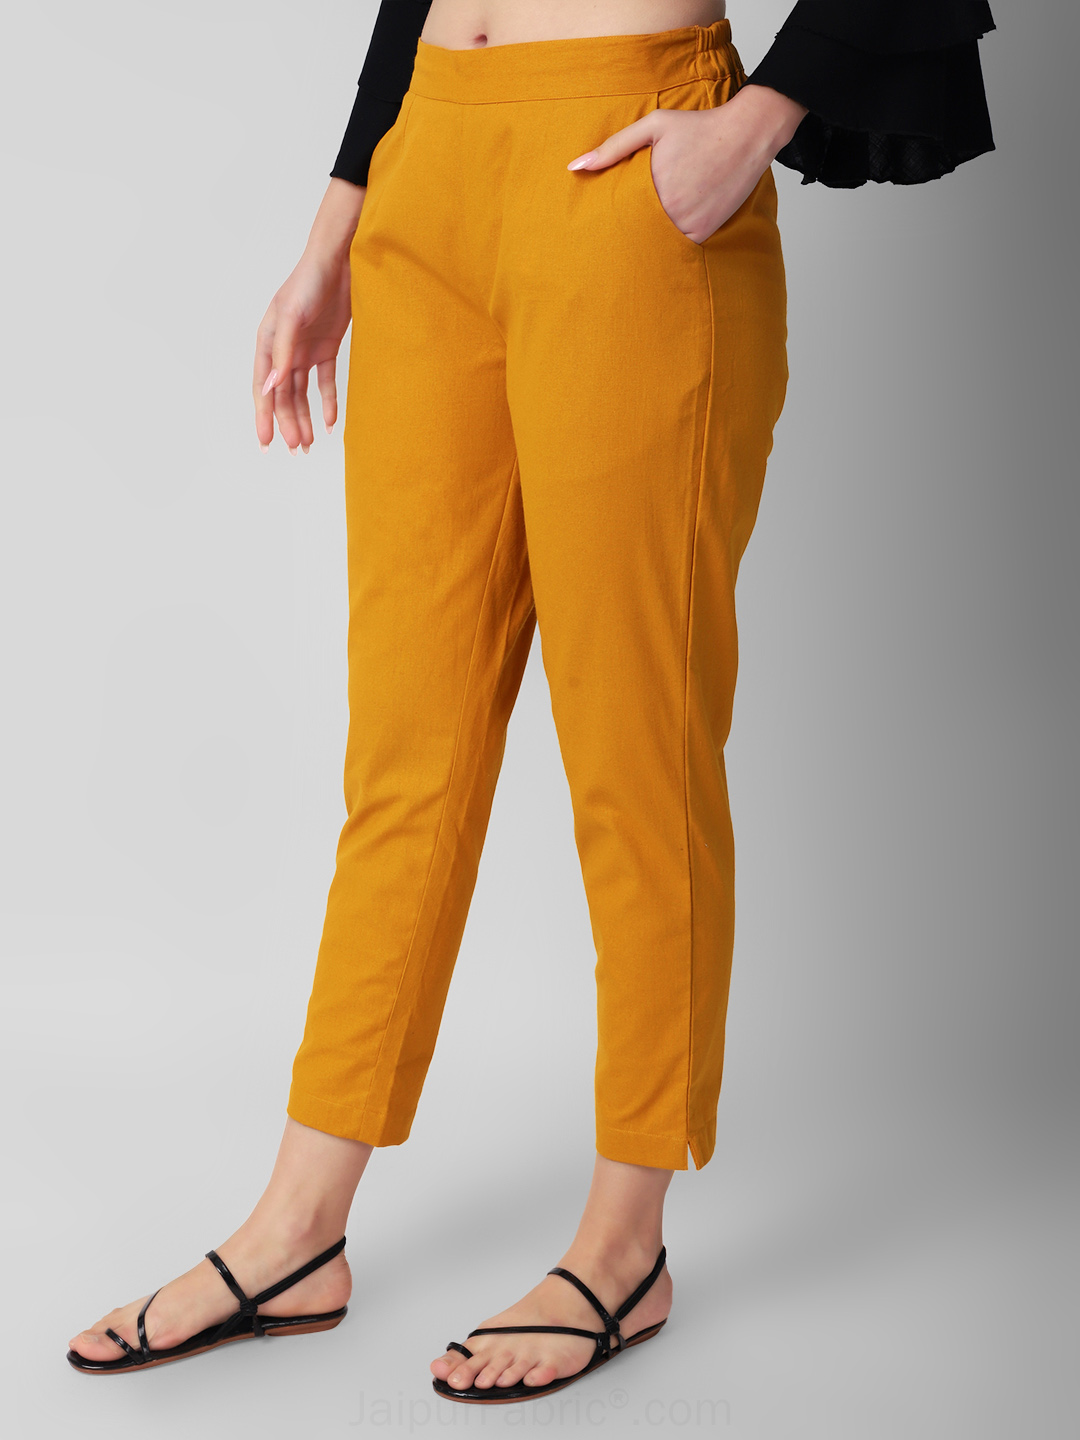 Mustard Harvest Women Cotton Pants casual and semi formal daily trousers